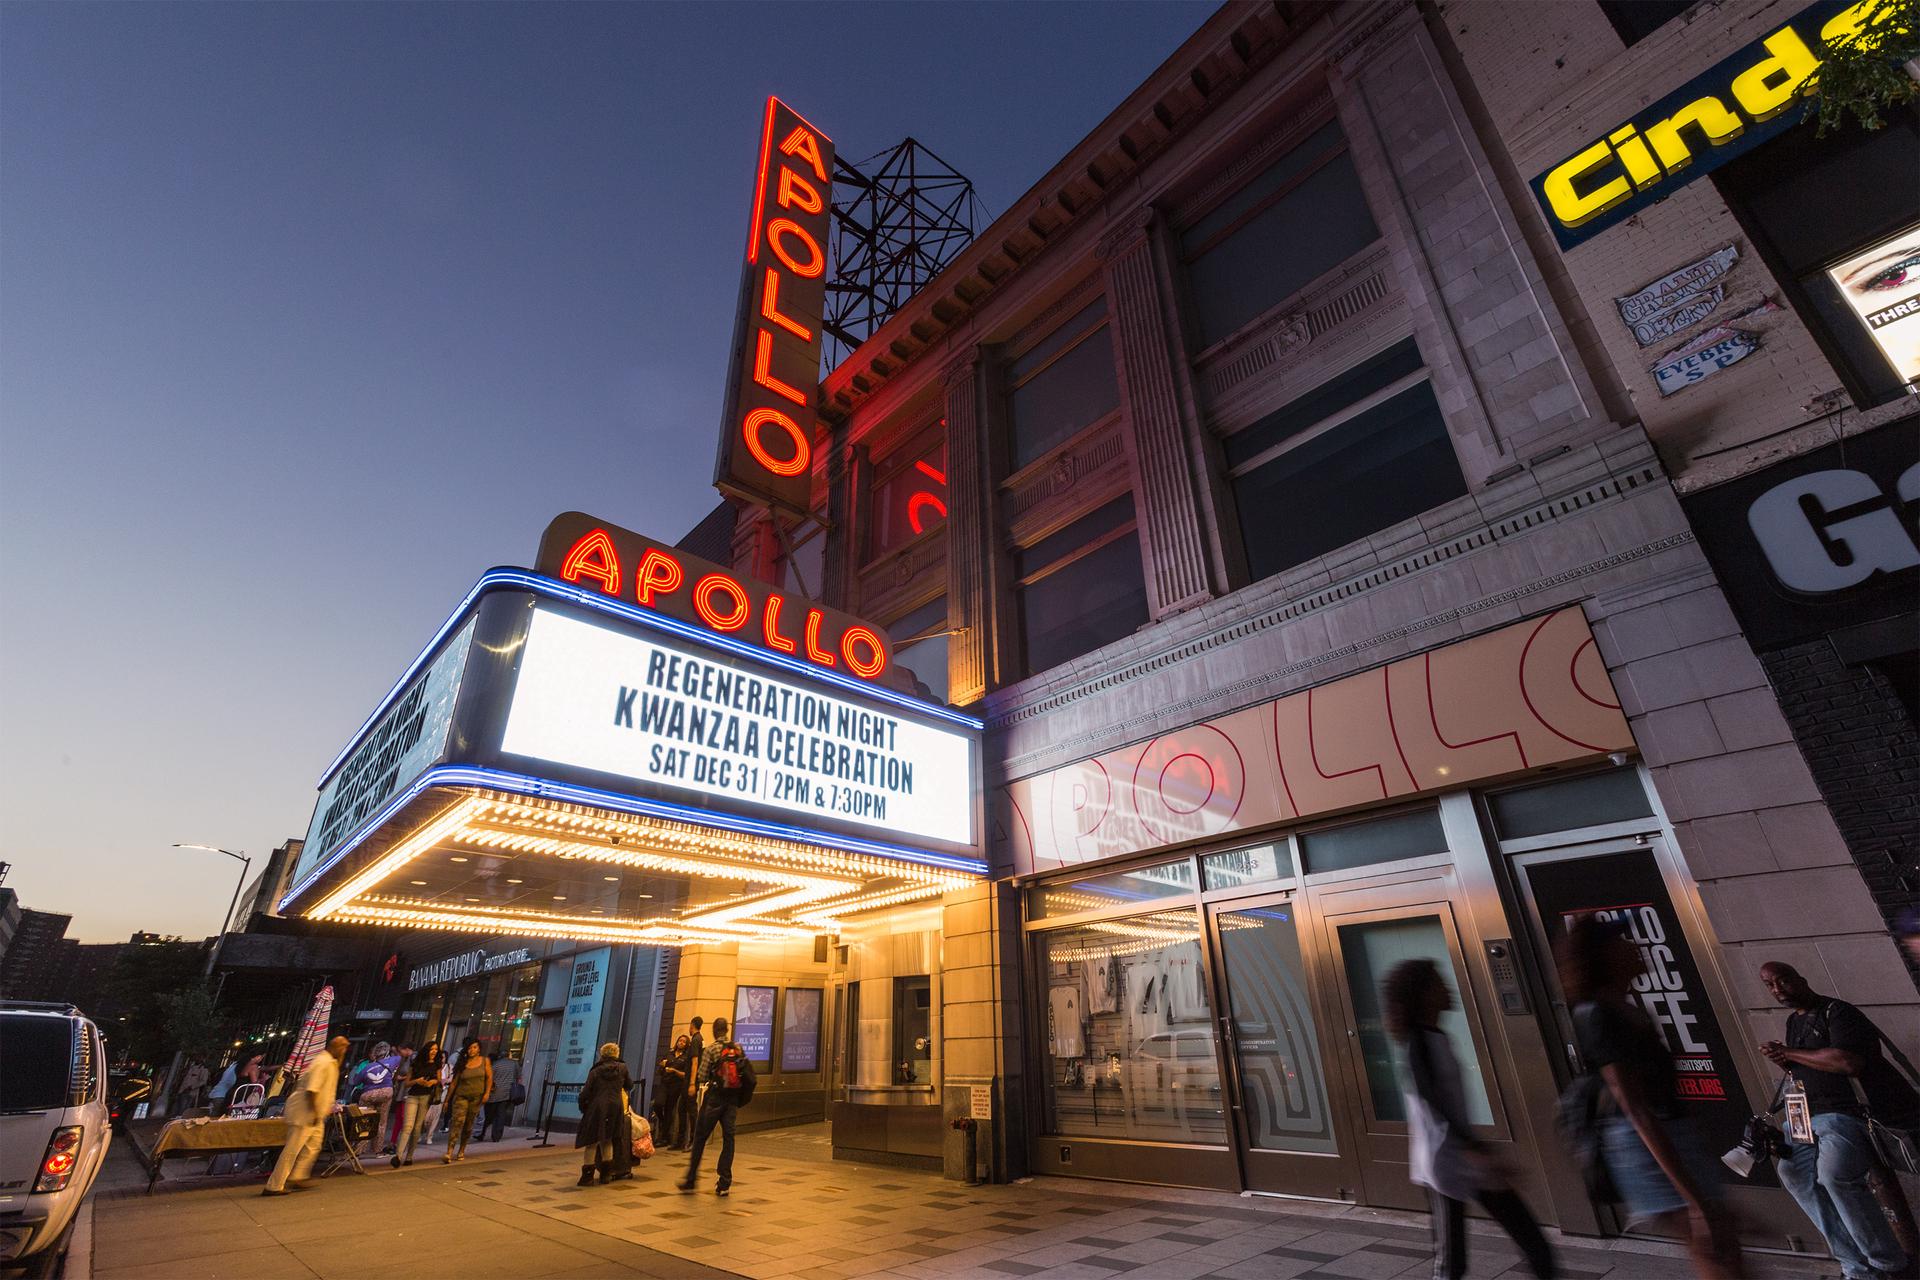 Exterior of the Apollo Theater in Harlem, NYC